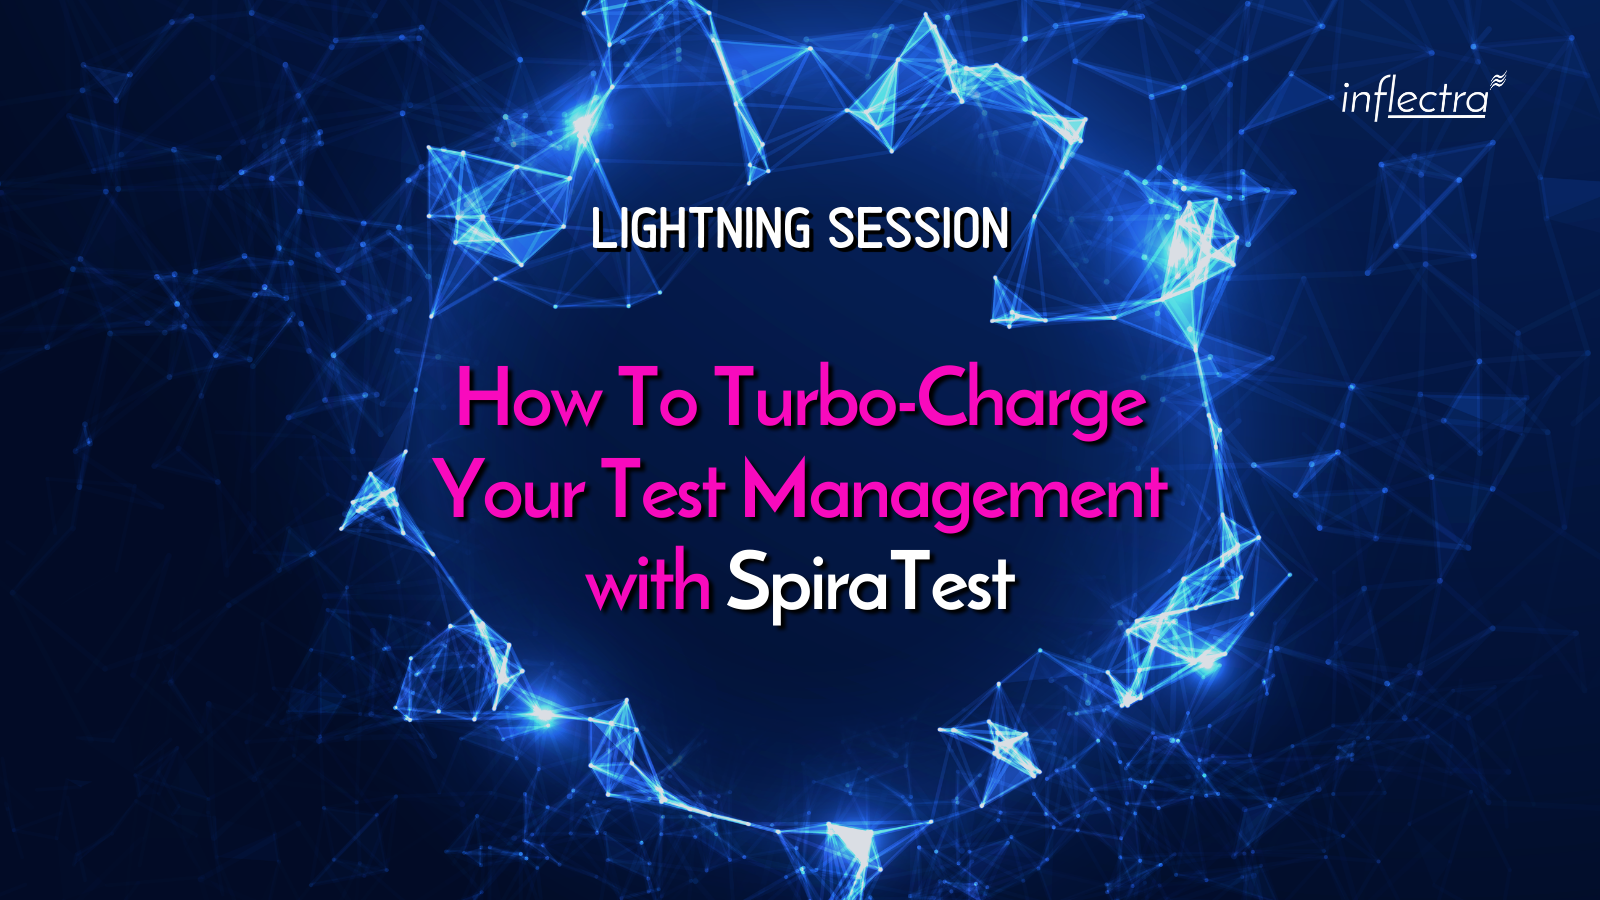 how-to-turbo-charge-your-test-management-with-spiratest-image